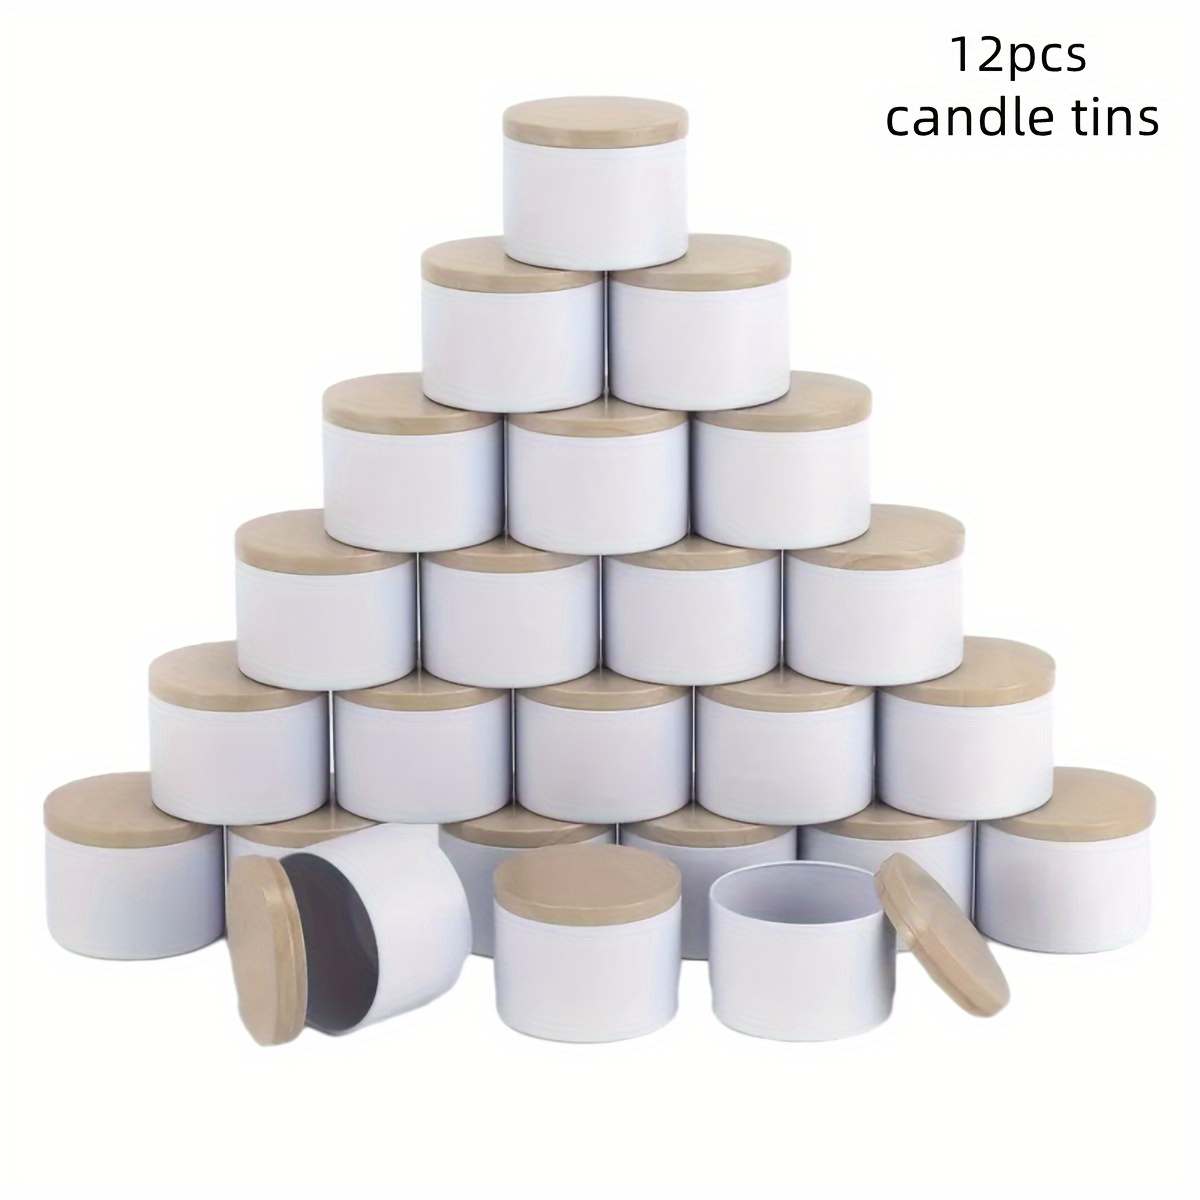 

12 Pack Of White Metal Candle Tins With Wooden Lids - Perfect For Diy Candles And Home Decor